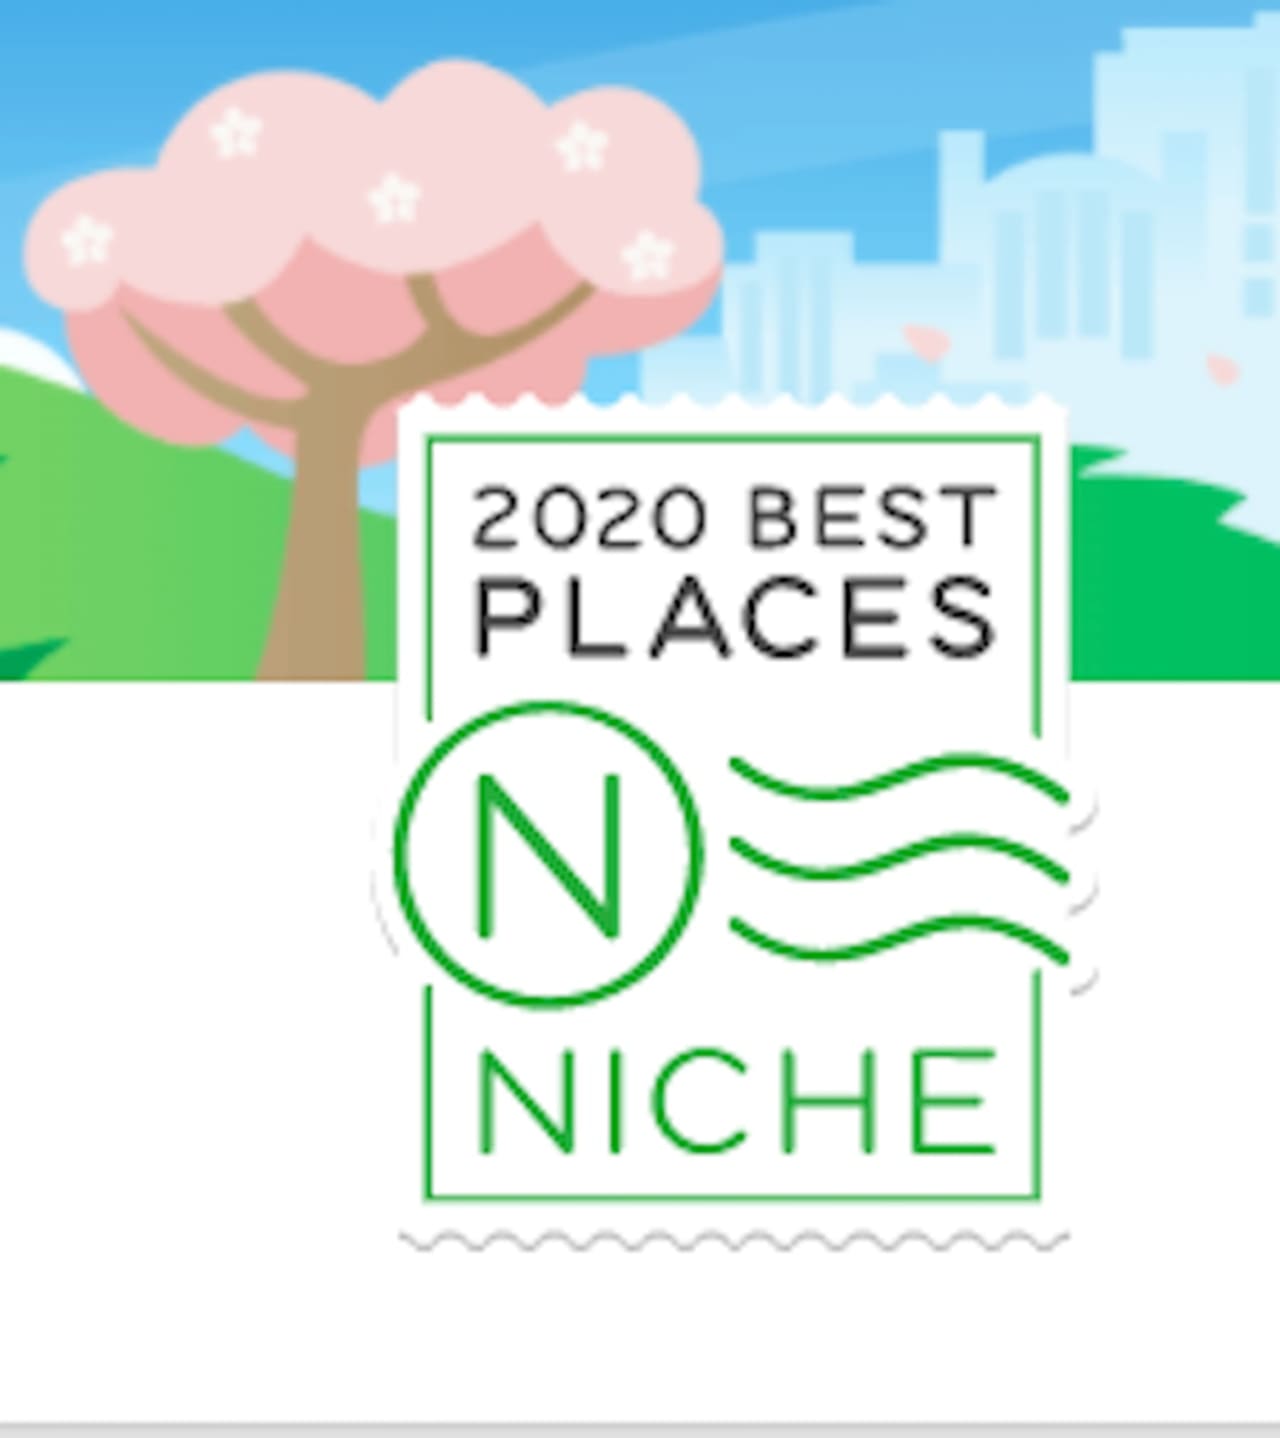 Niche 2020 Best Places To Live.